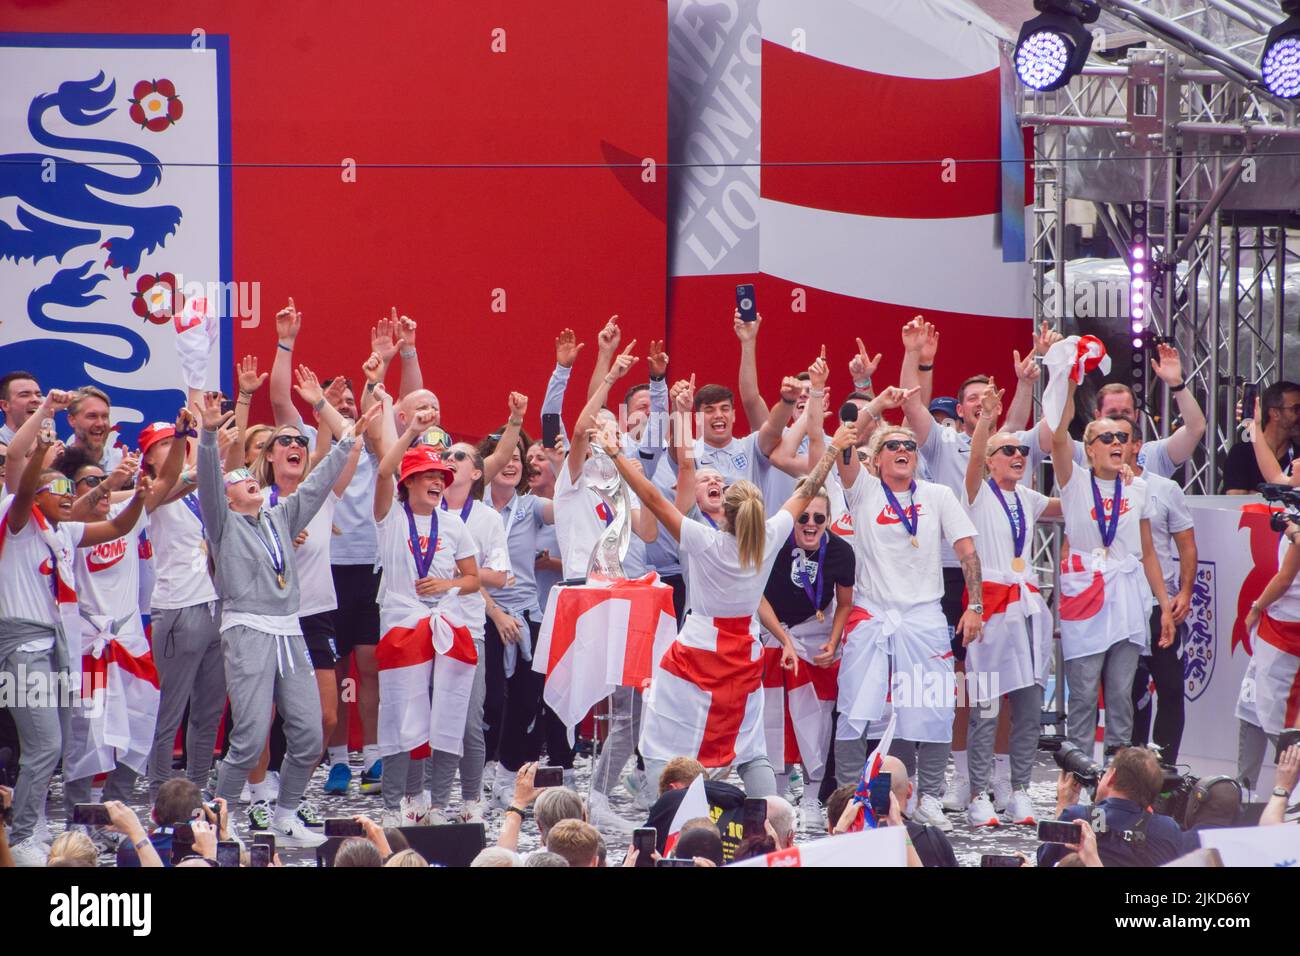 London, UK. 01st Aug, 2022. The England team celebrates on the stage during the Women's Euro 2022 special event in Trafalgar Square. Thousands of people gathered to celebrate the England team, known as the Lionesses, winning Women's Euro 2022 soccer tournament. England beat Germany 2-1. Credit: SOPA Images Limited/Alamy Live News Stock Photo